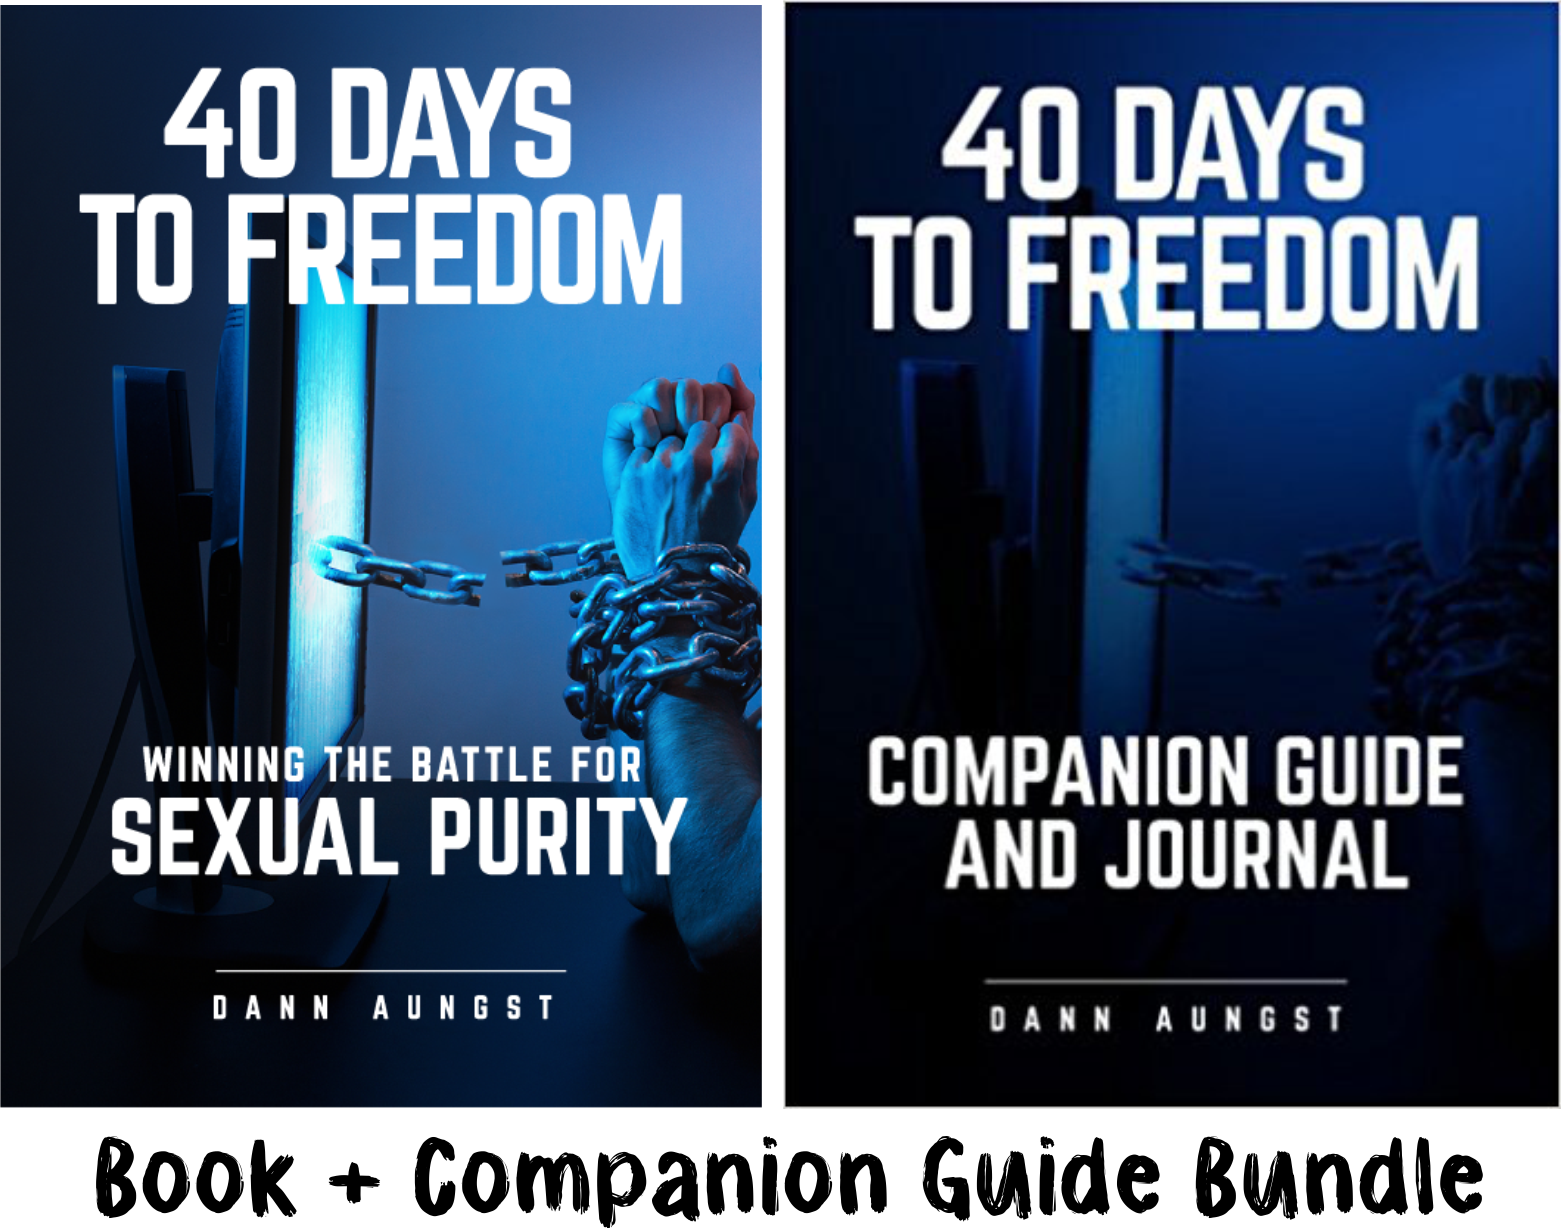 40 Days to Freedom (280pgs) + Companion Guide and Journal (400pgs)  2 book bundle